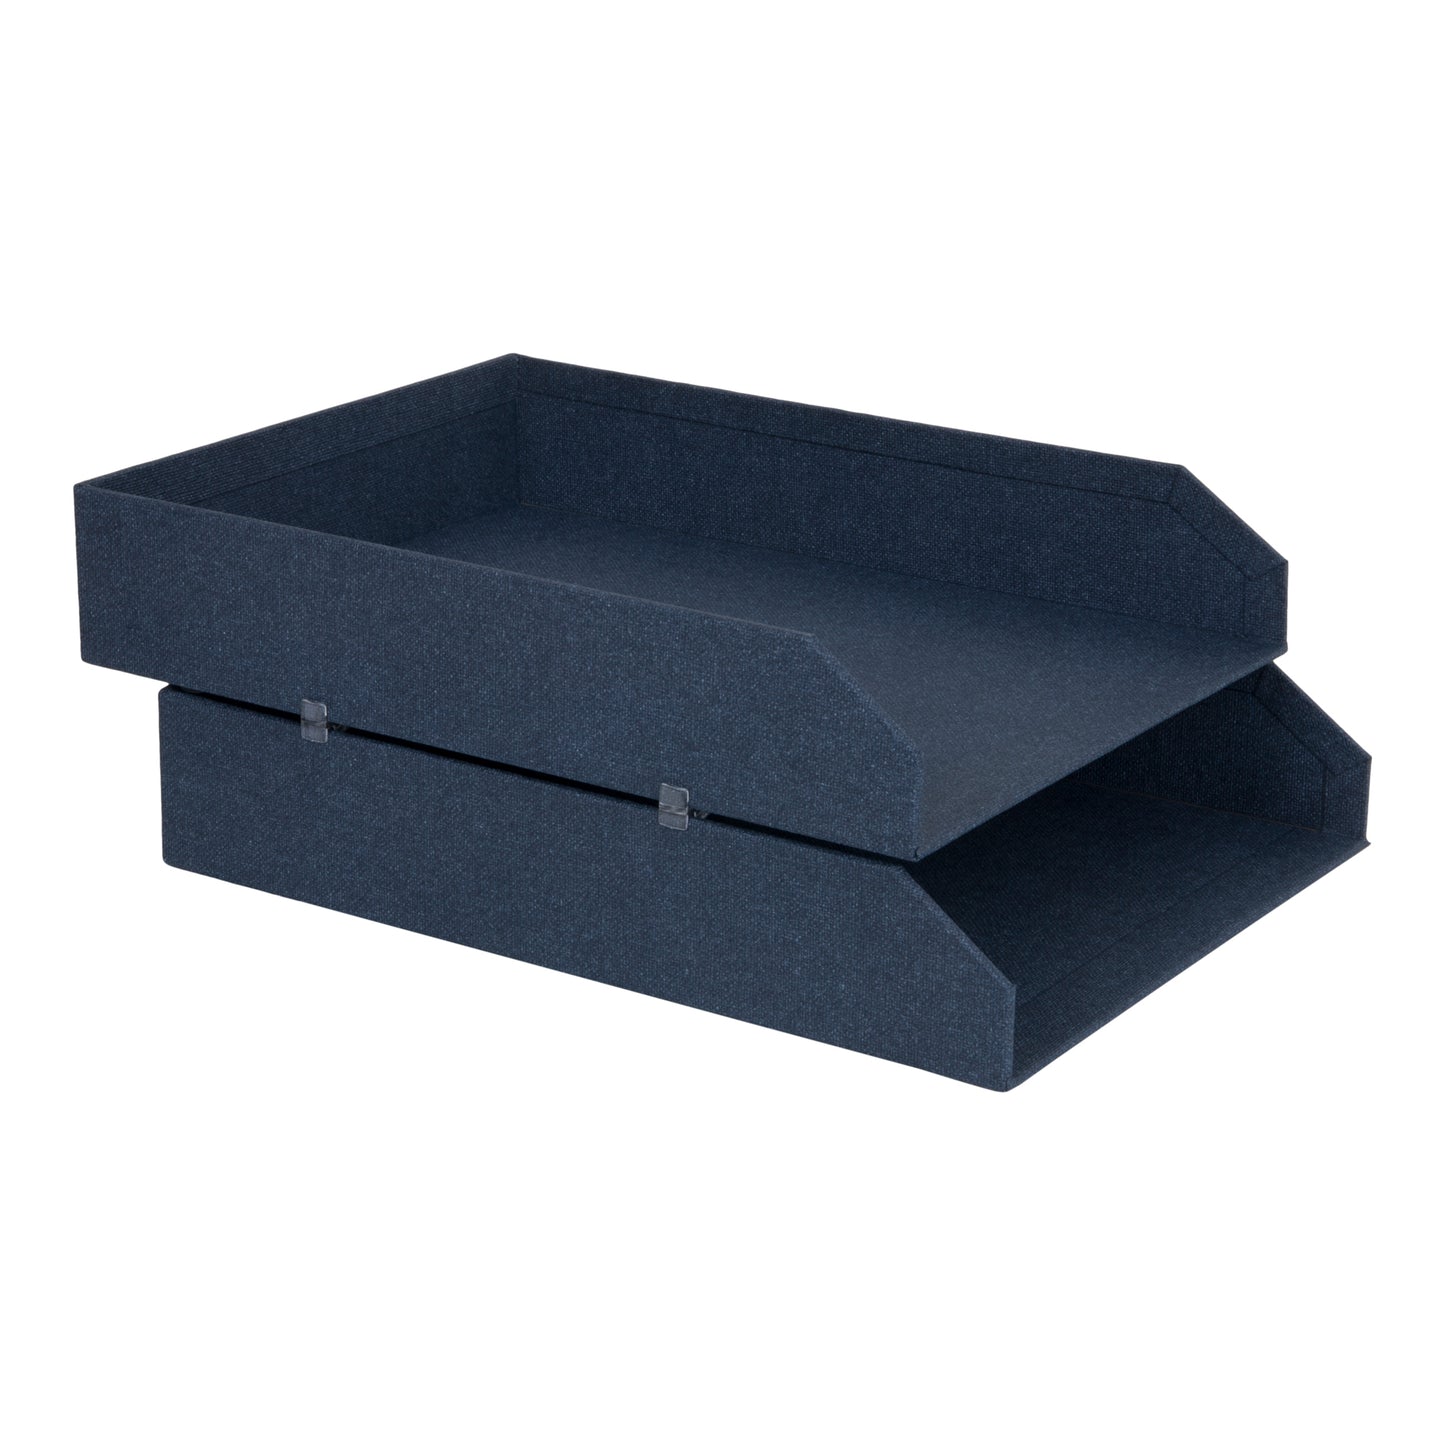 Bigso Hakan Blue Stackable Canvas Letter Organizer Trays for A4 or Letter Size Documents Pack of 2, 9.1” x 12.2” x 2.4"